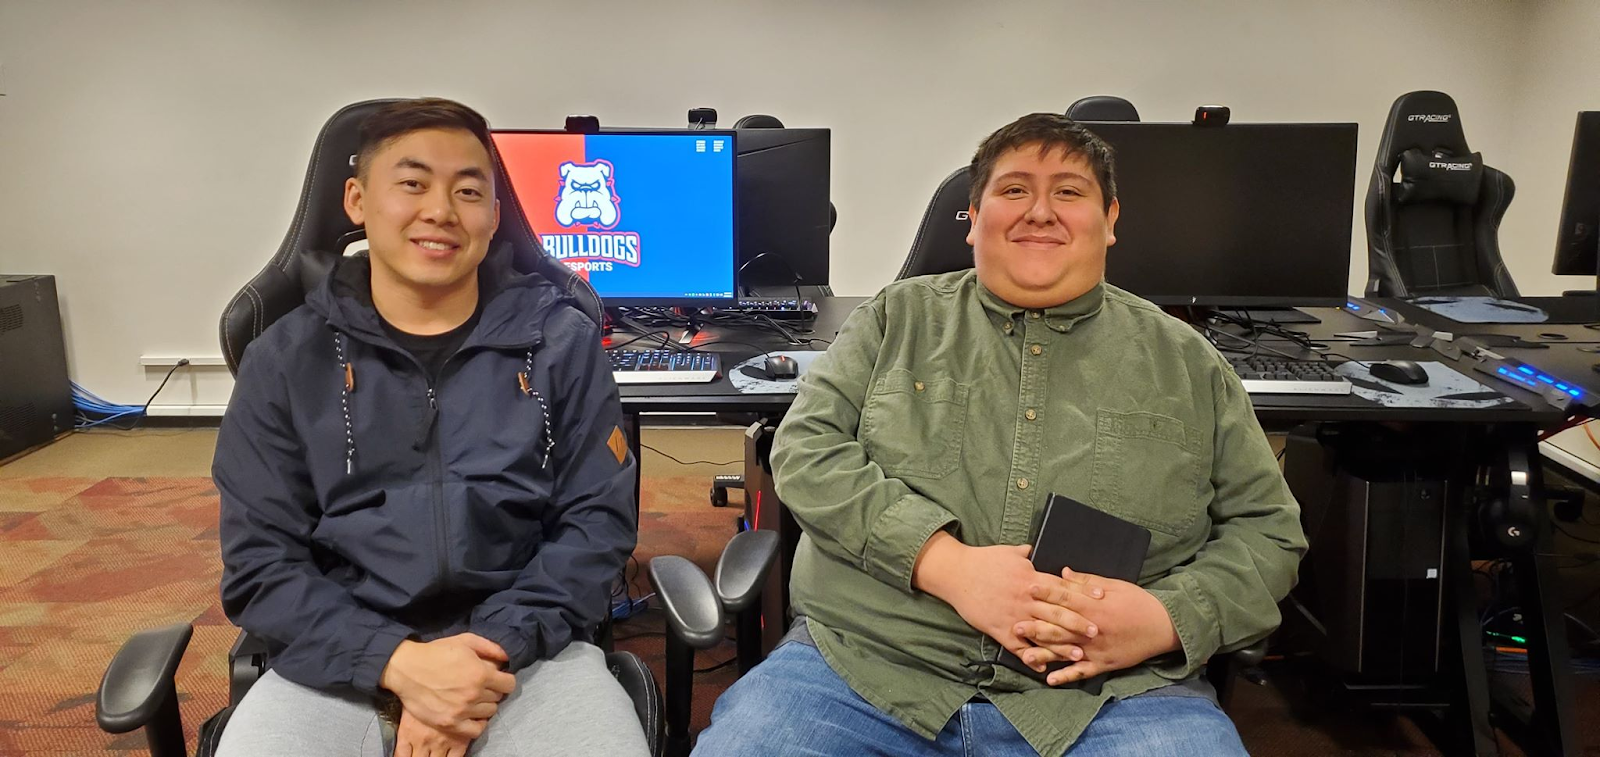 Tommy Cherta Lee  (left) and Alan Gurrola (right) sit inside the eSports Areana in the USU on Monday, February 24, 2020. (Galcy Lee/The Collegian)